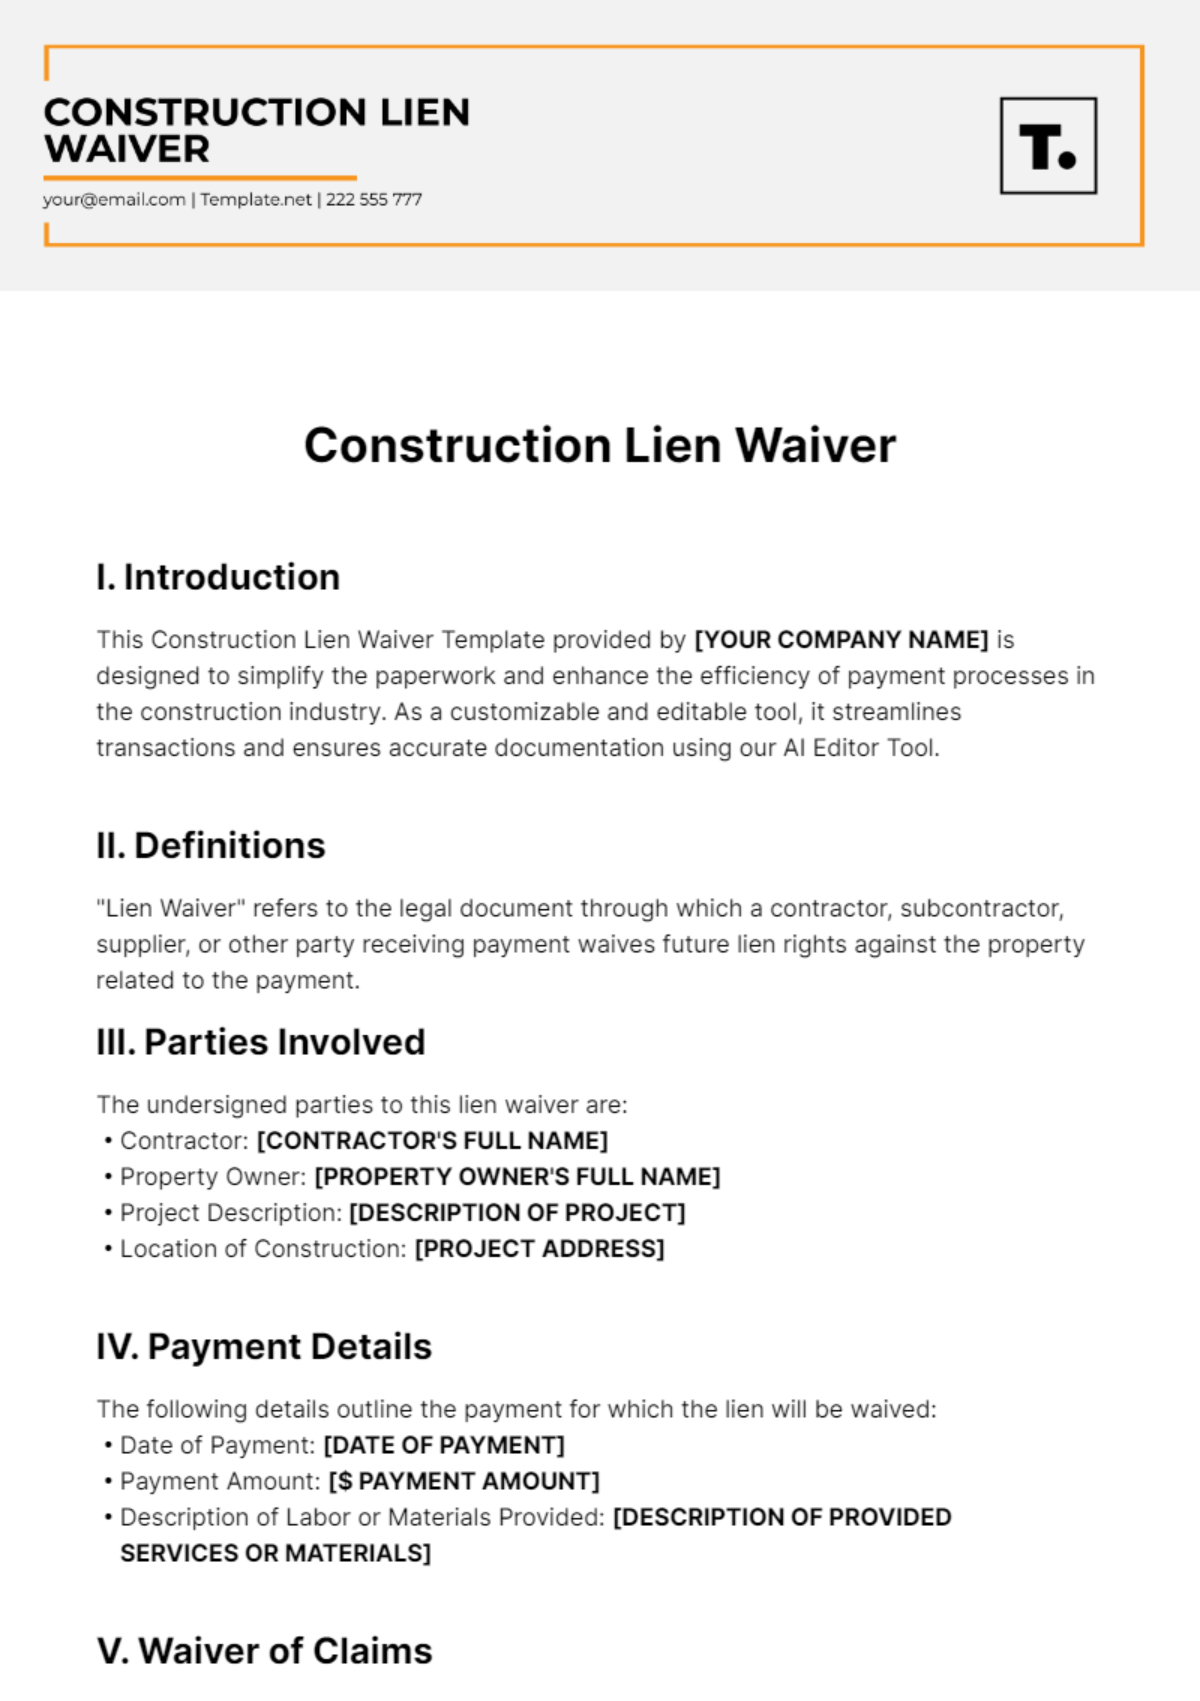 Free Construction Lien Waiver Template